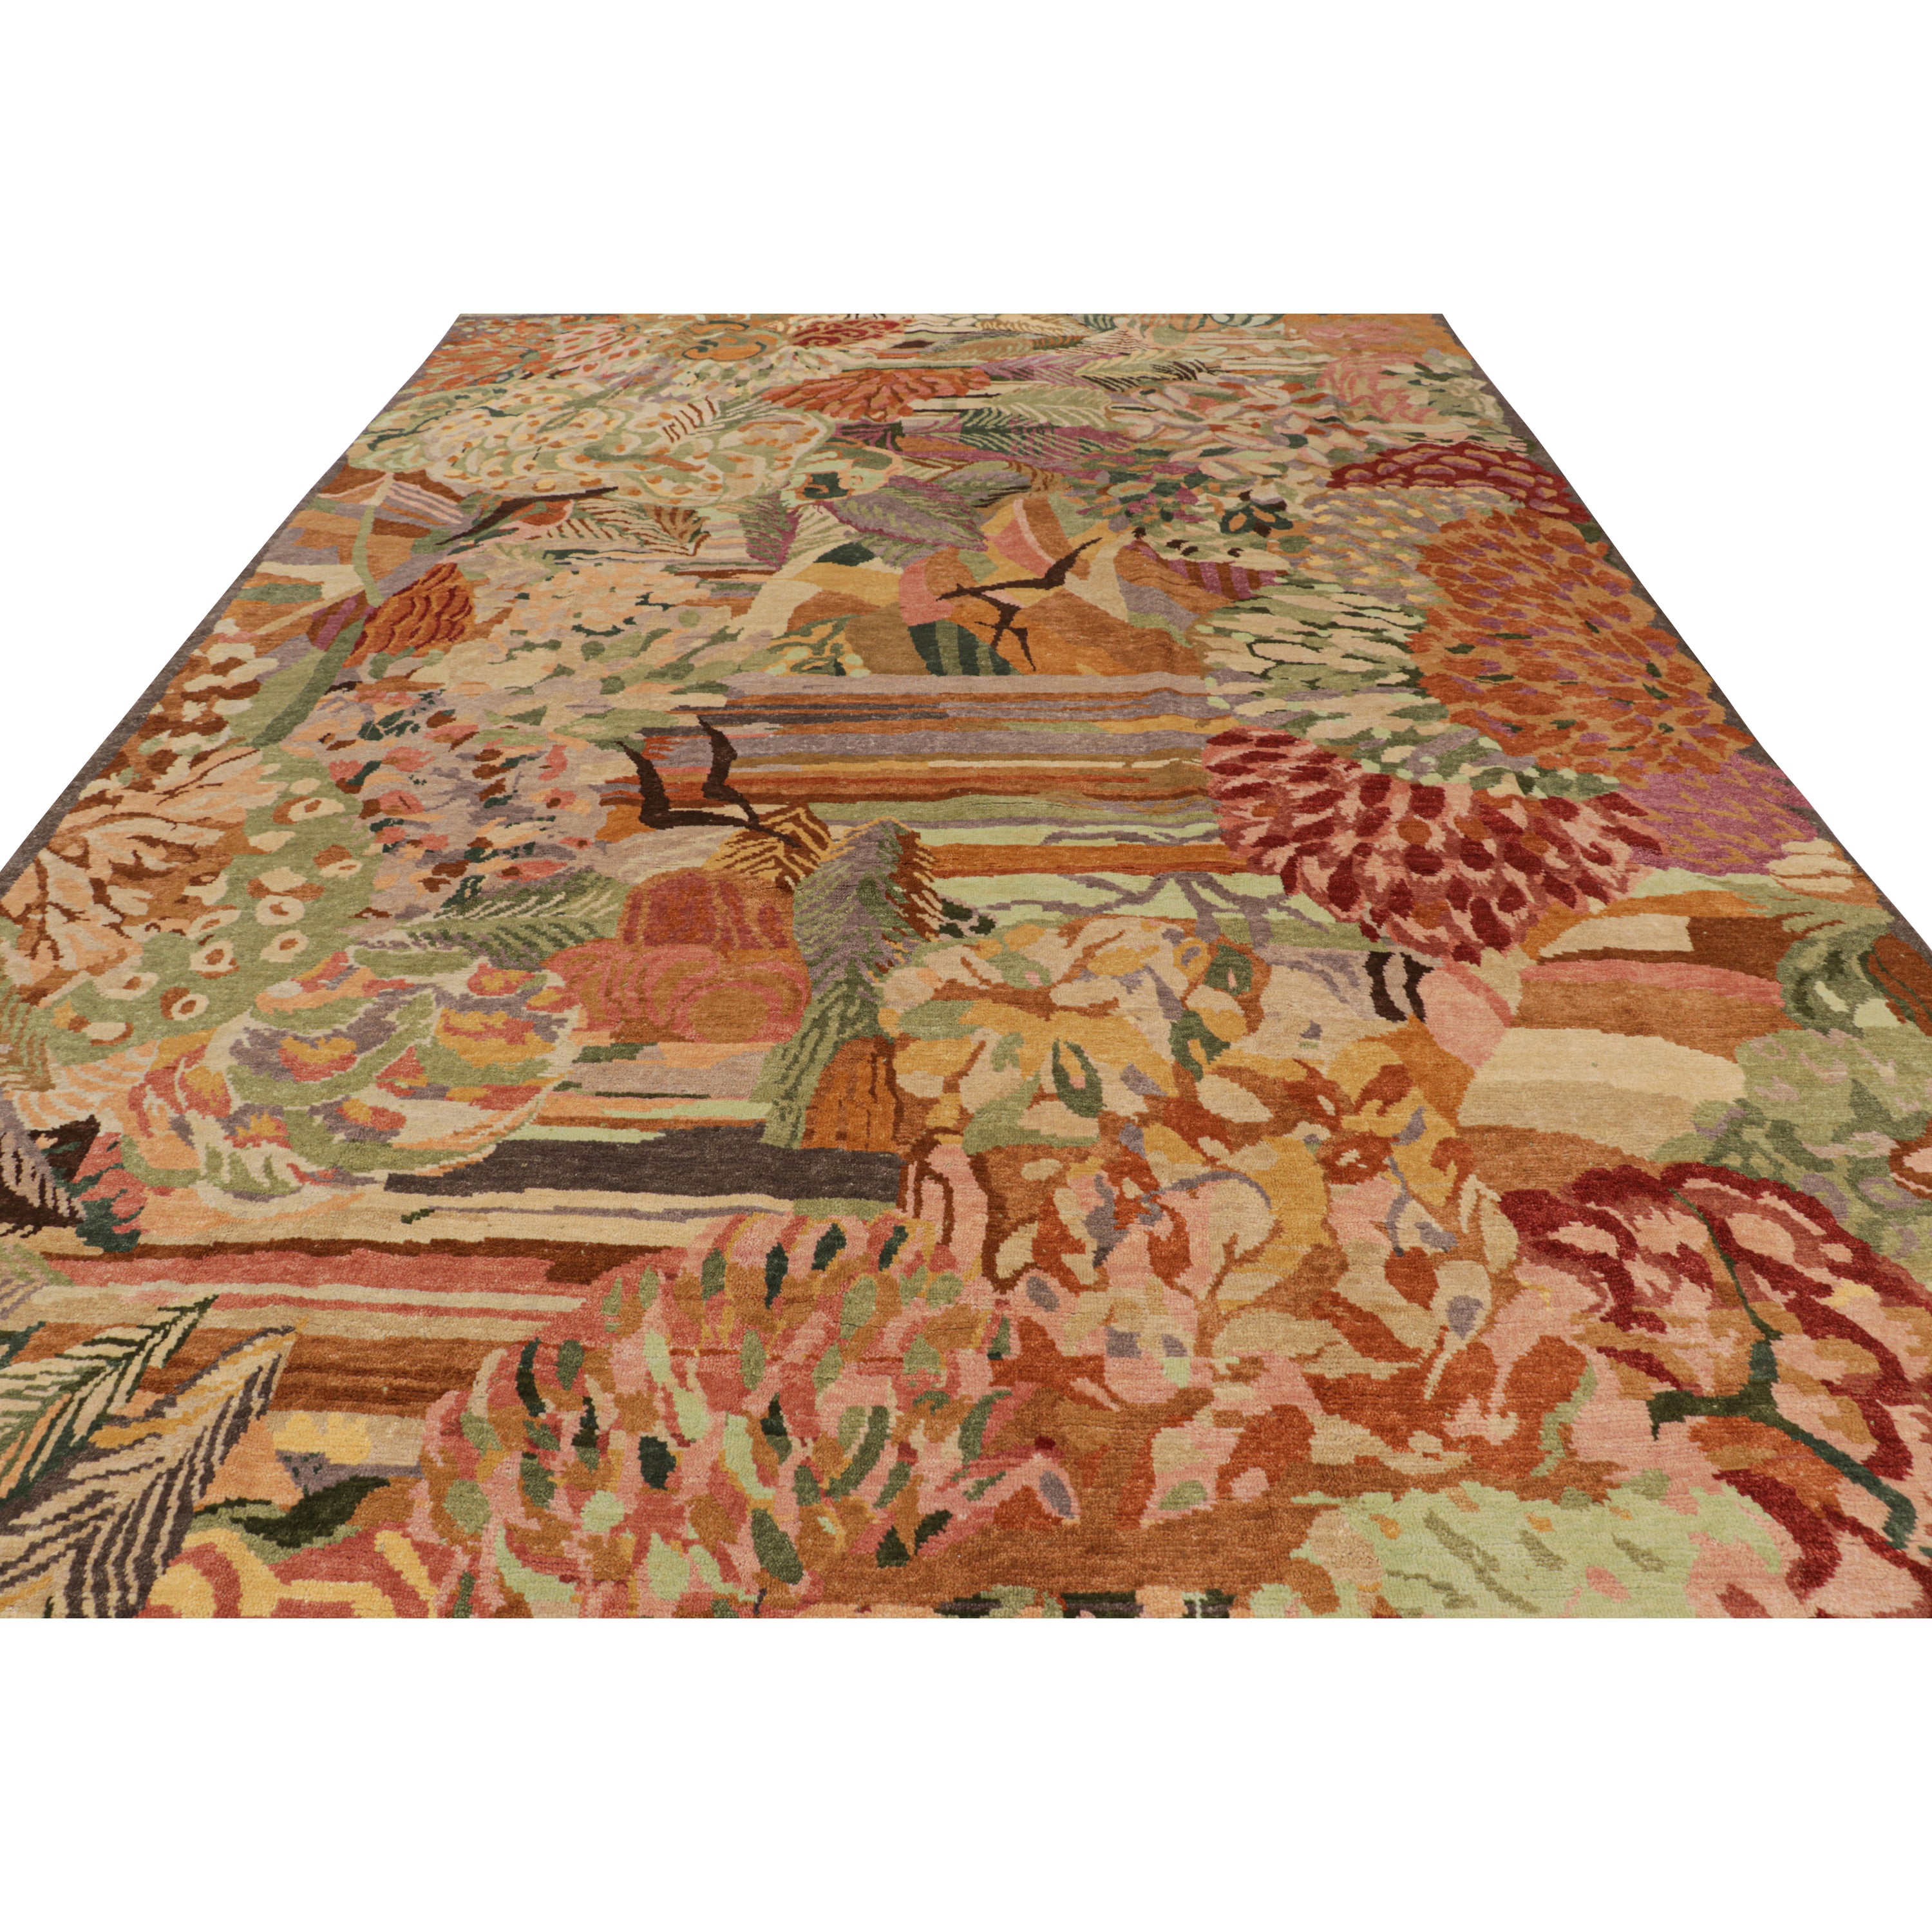 Multicolored Contemporary Wool Rug - 9'11" x 13'11"